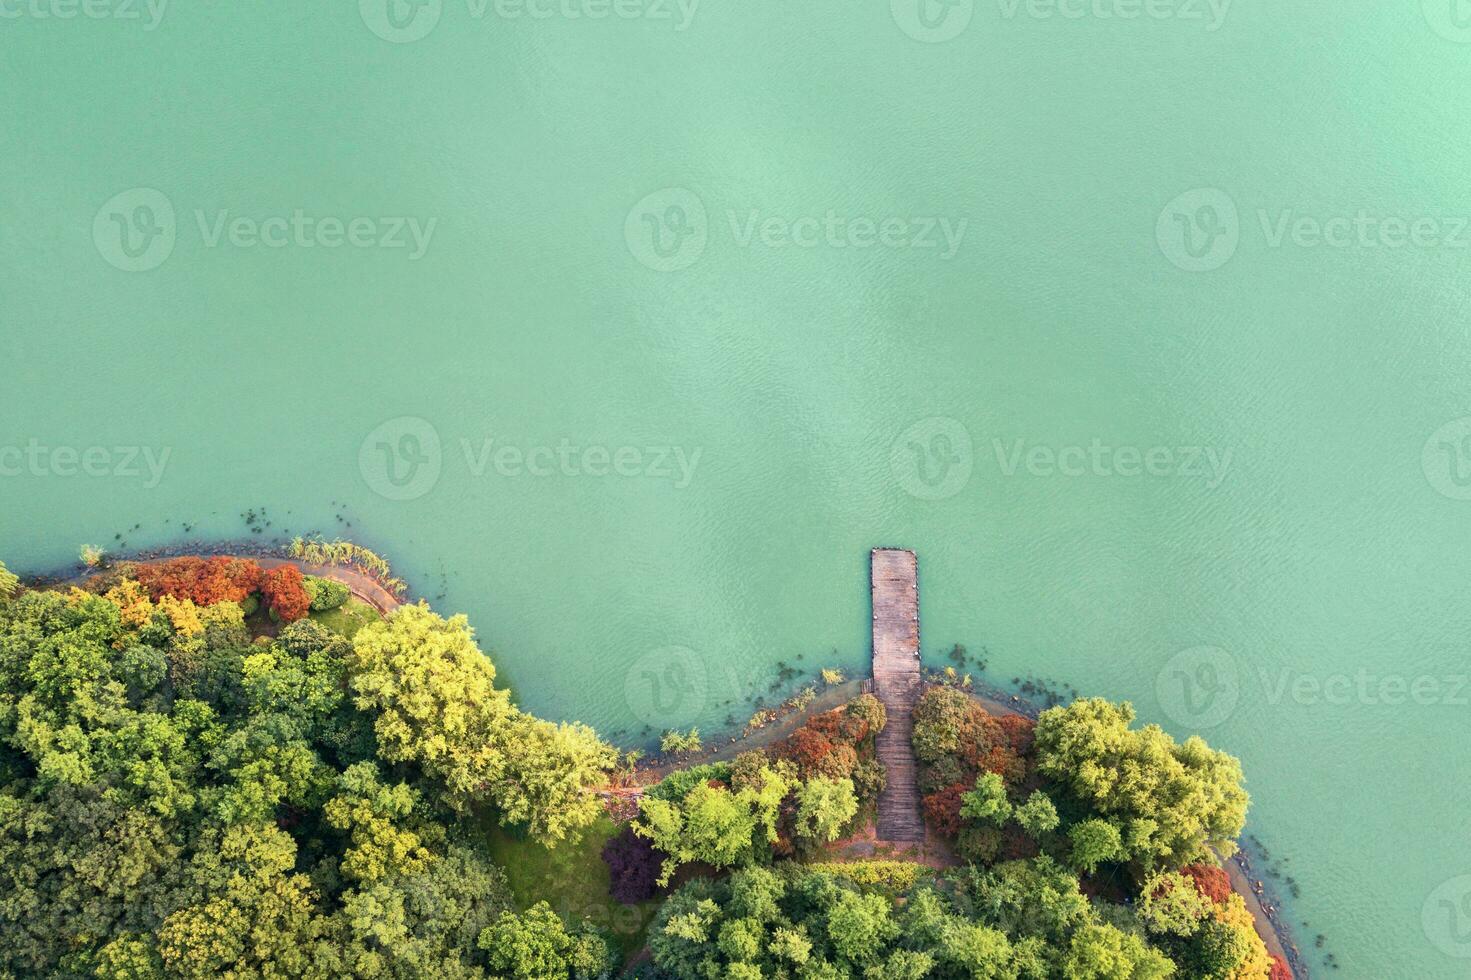 Looking down to the island in the lake. photo